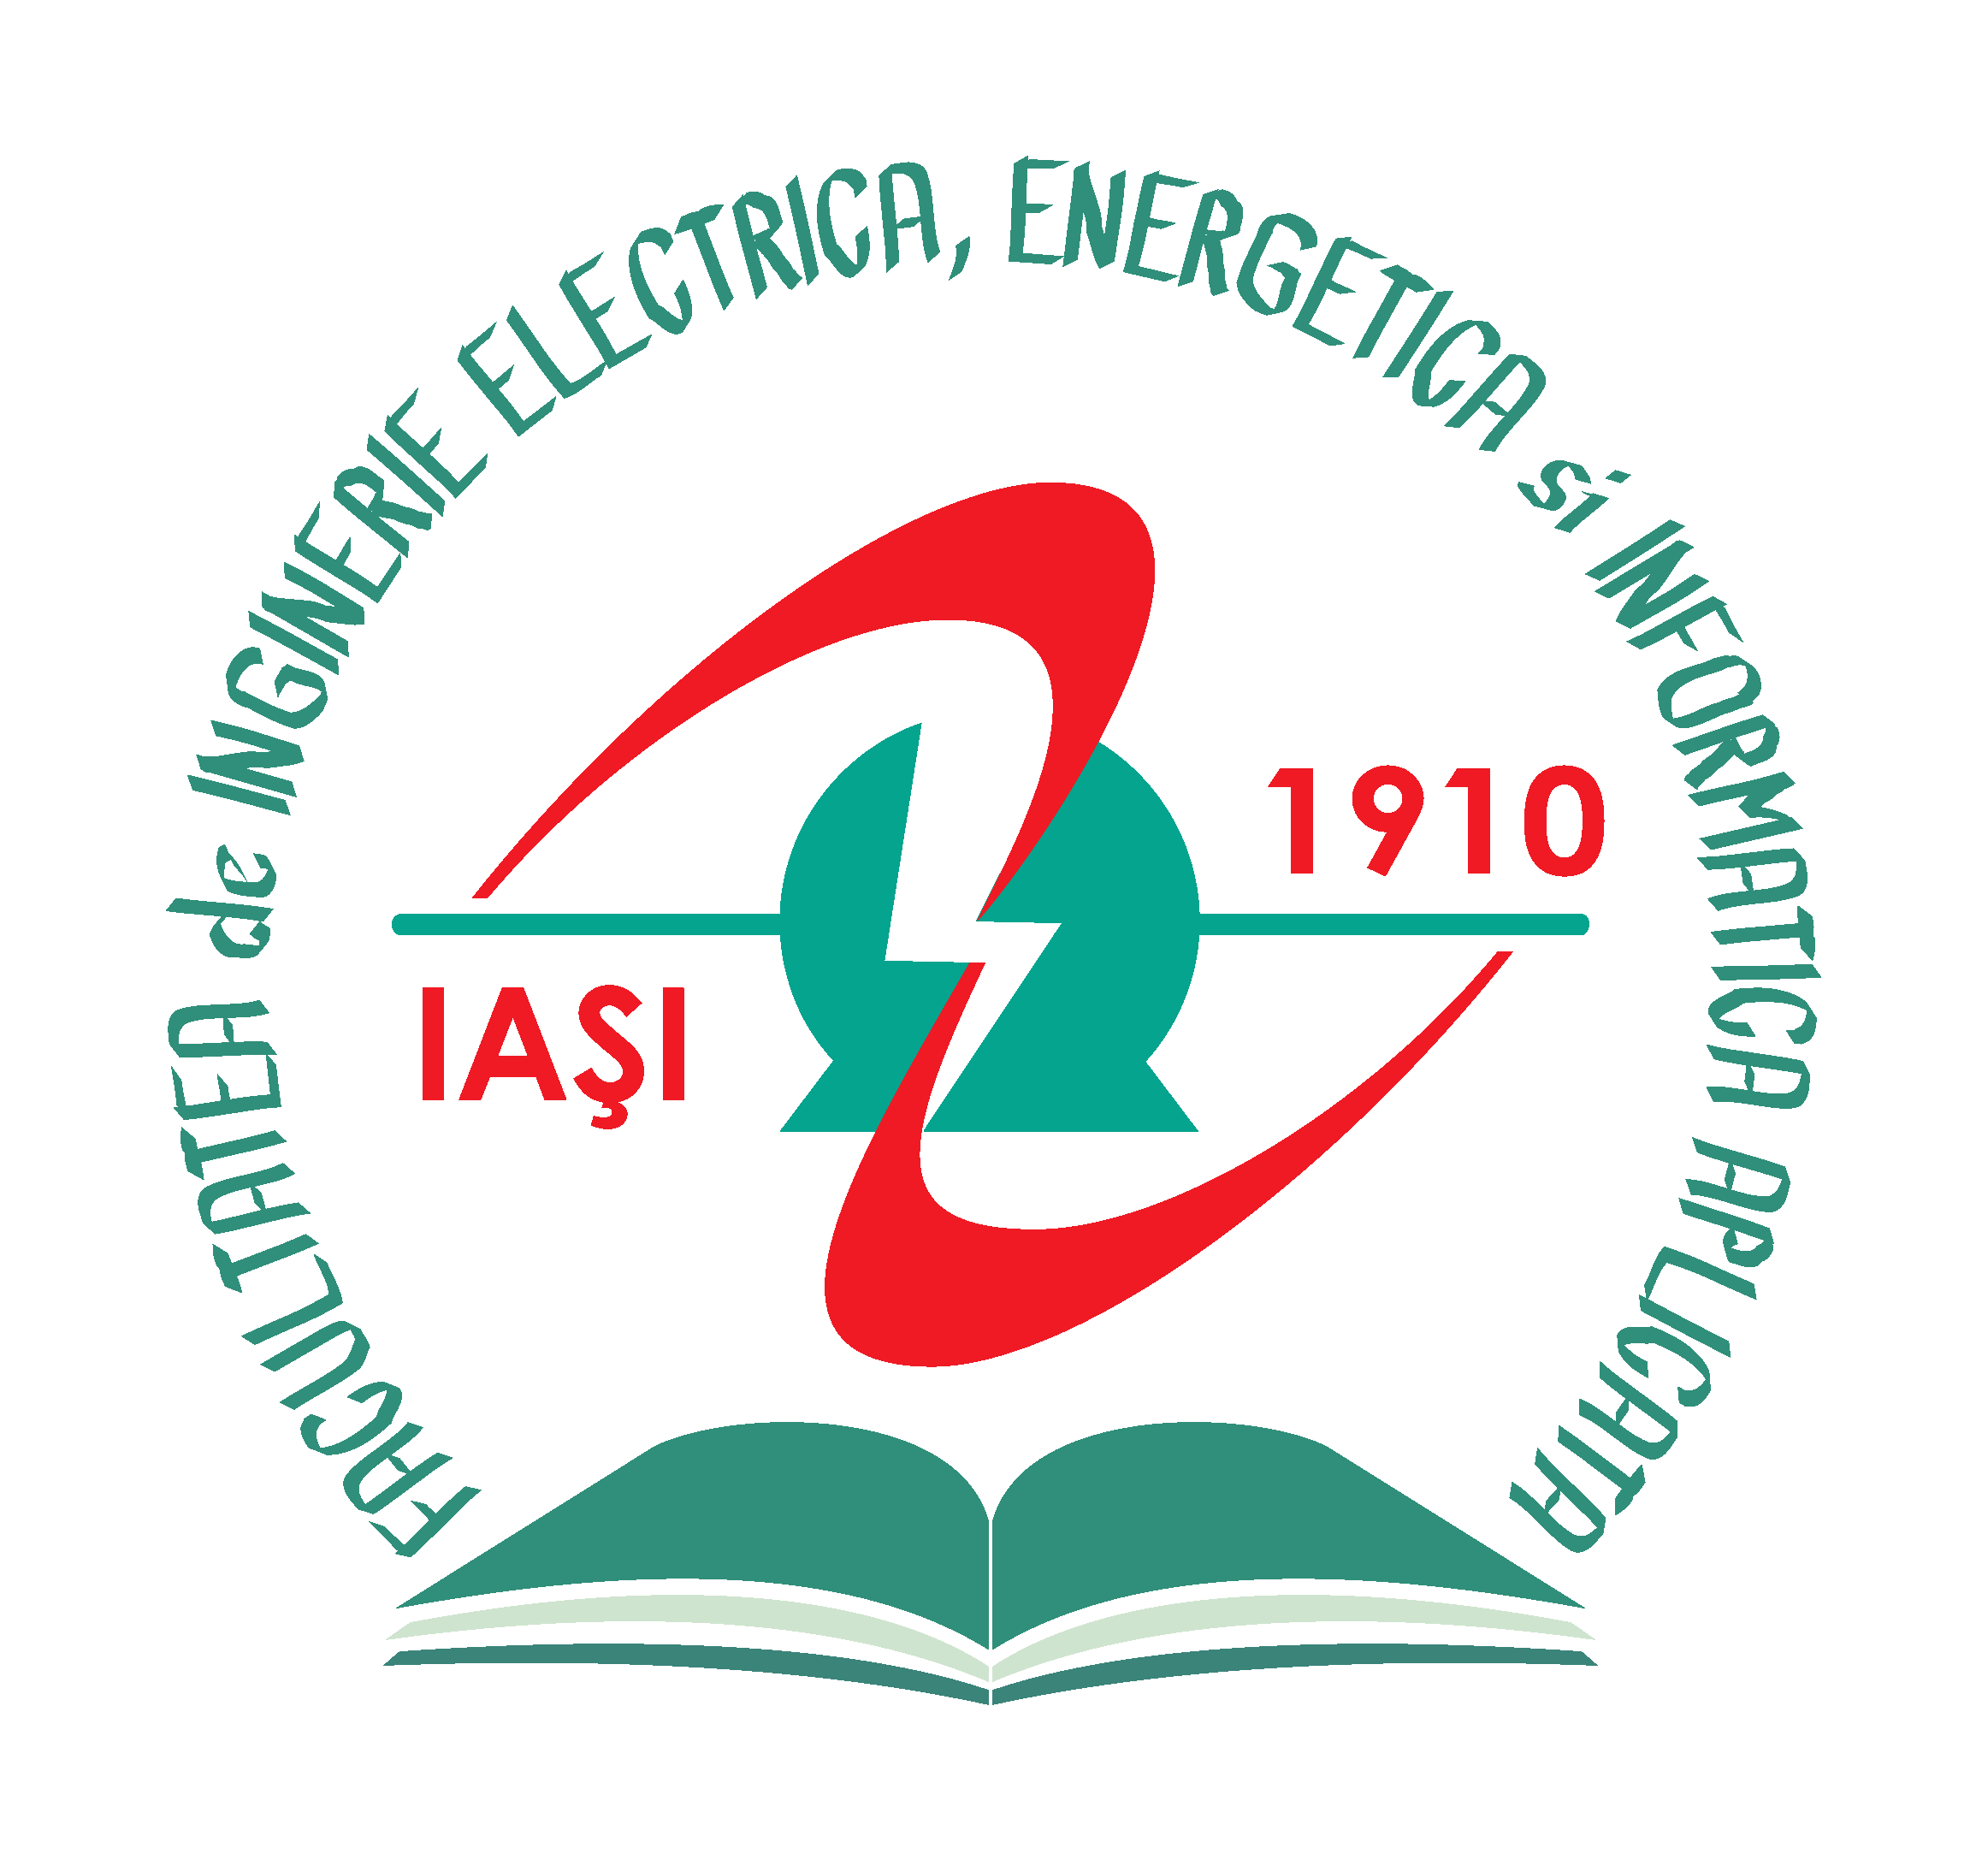 Faculty of Electrical Engineering in Iasi